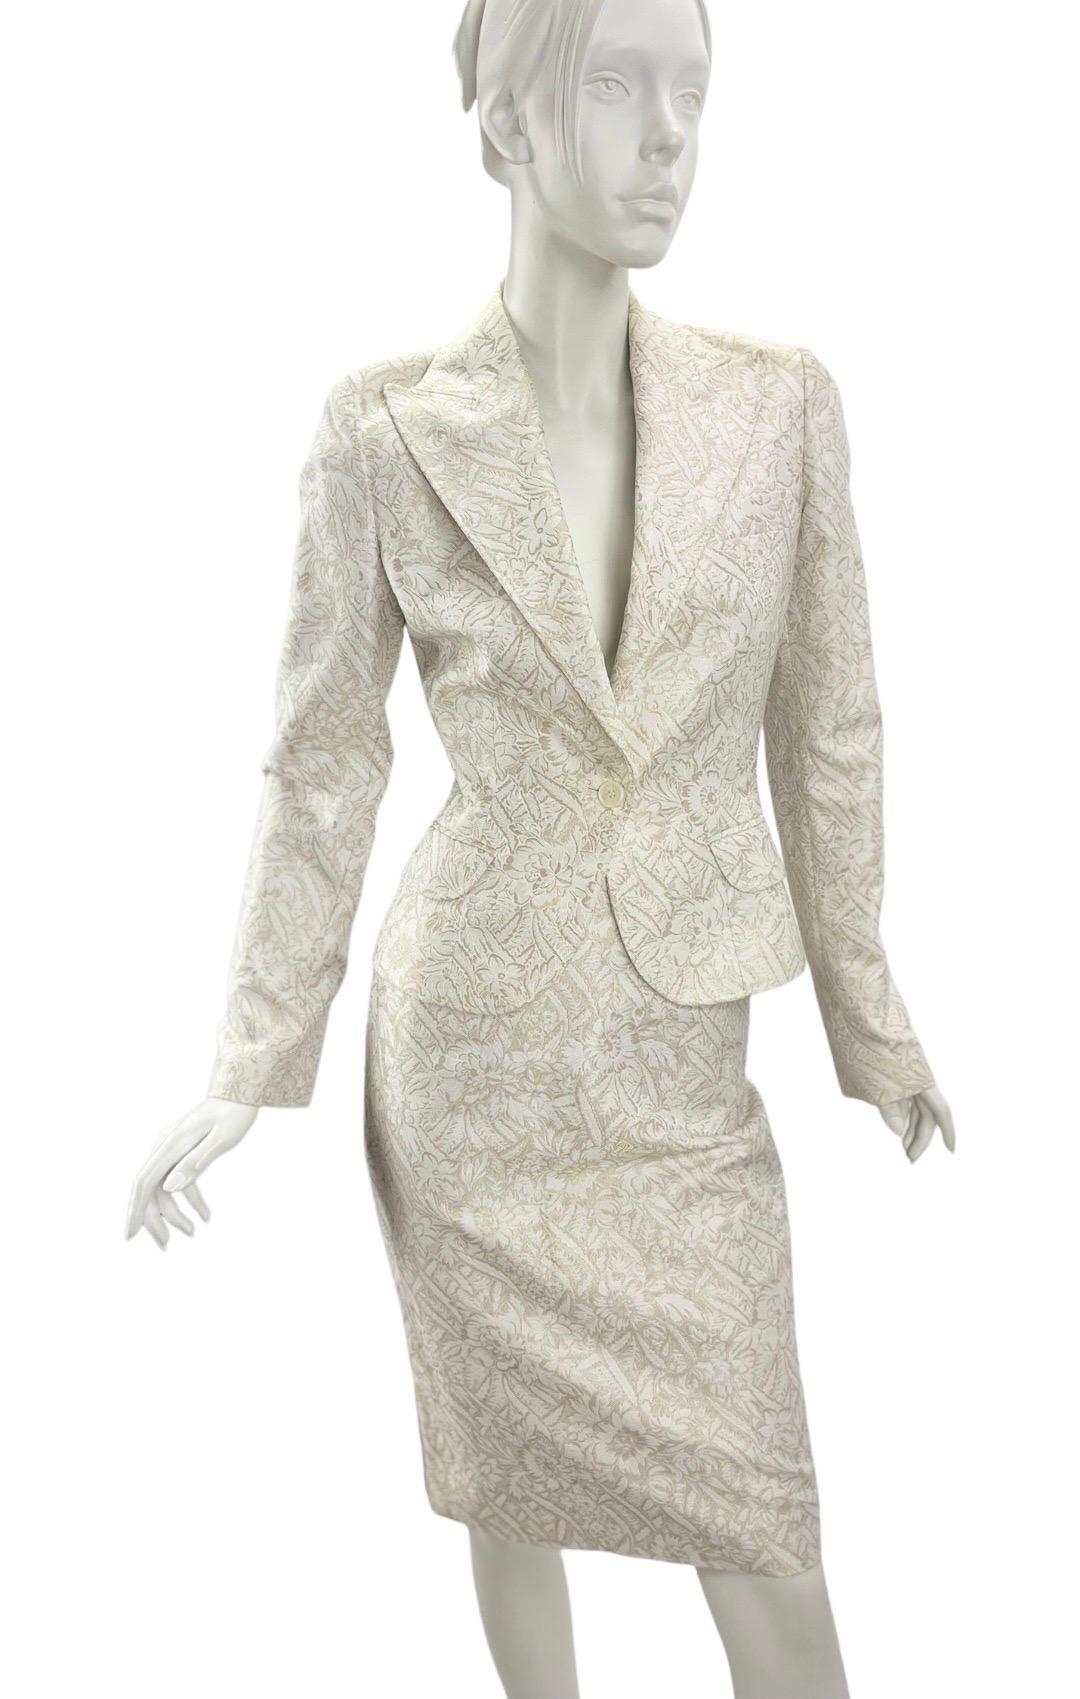 Early 2000-s Vintage Dolce & Gabbana Vanilla White Gold Floral Jacquard Skirt Suit  
It Size 40
74% Cotton, 26% Metal, fully lined. Made in Italy.
Skirt measurements are: waist 27